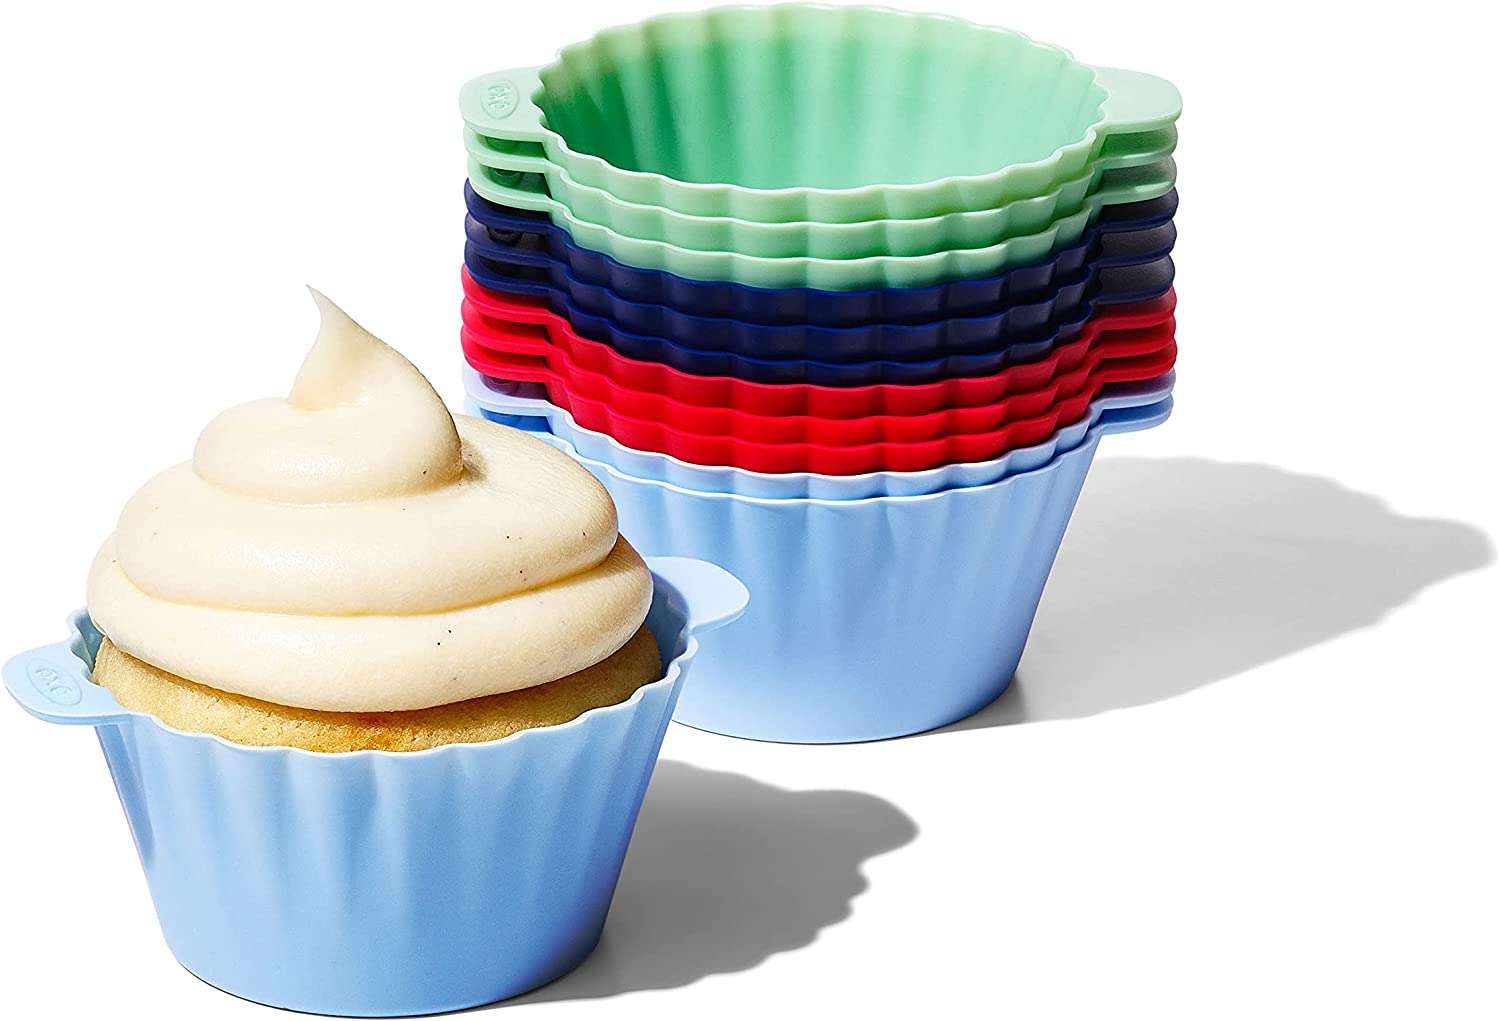 8. OXO Reusable Muffin Cups